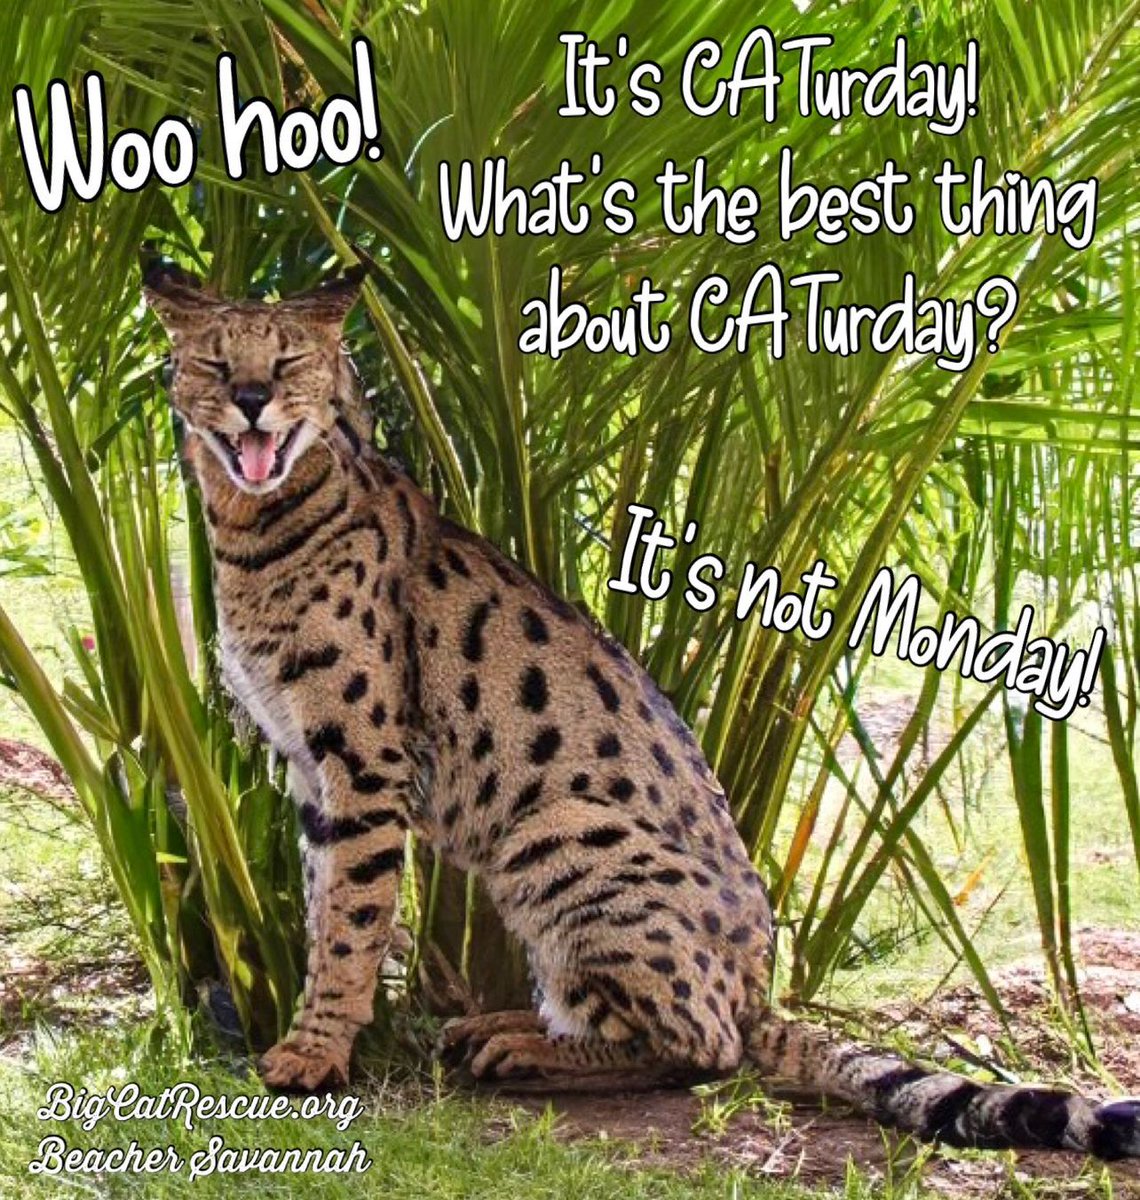 “Woo hoo! It’s CATurday! What’s the best thing about CATurday? It’s not Monday!” #BeacherSavannah #BigCatRescue #BigCats #Weekend #WeekendVibes #Caturday #Saturday #Memes #Quote #Quotes #Fun #Cute #CaroleBaskin